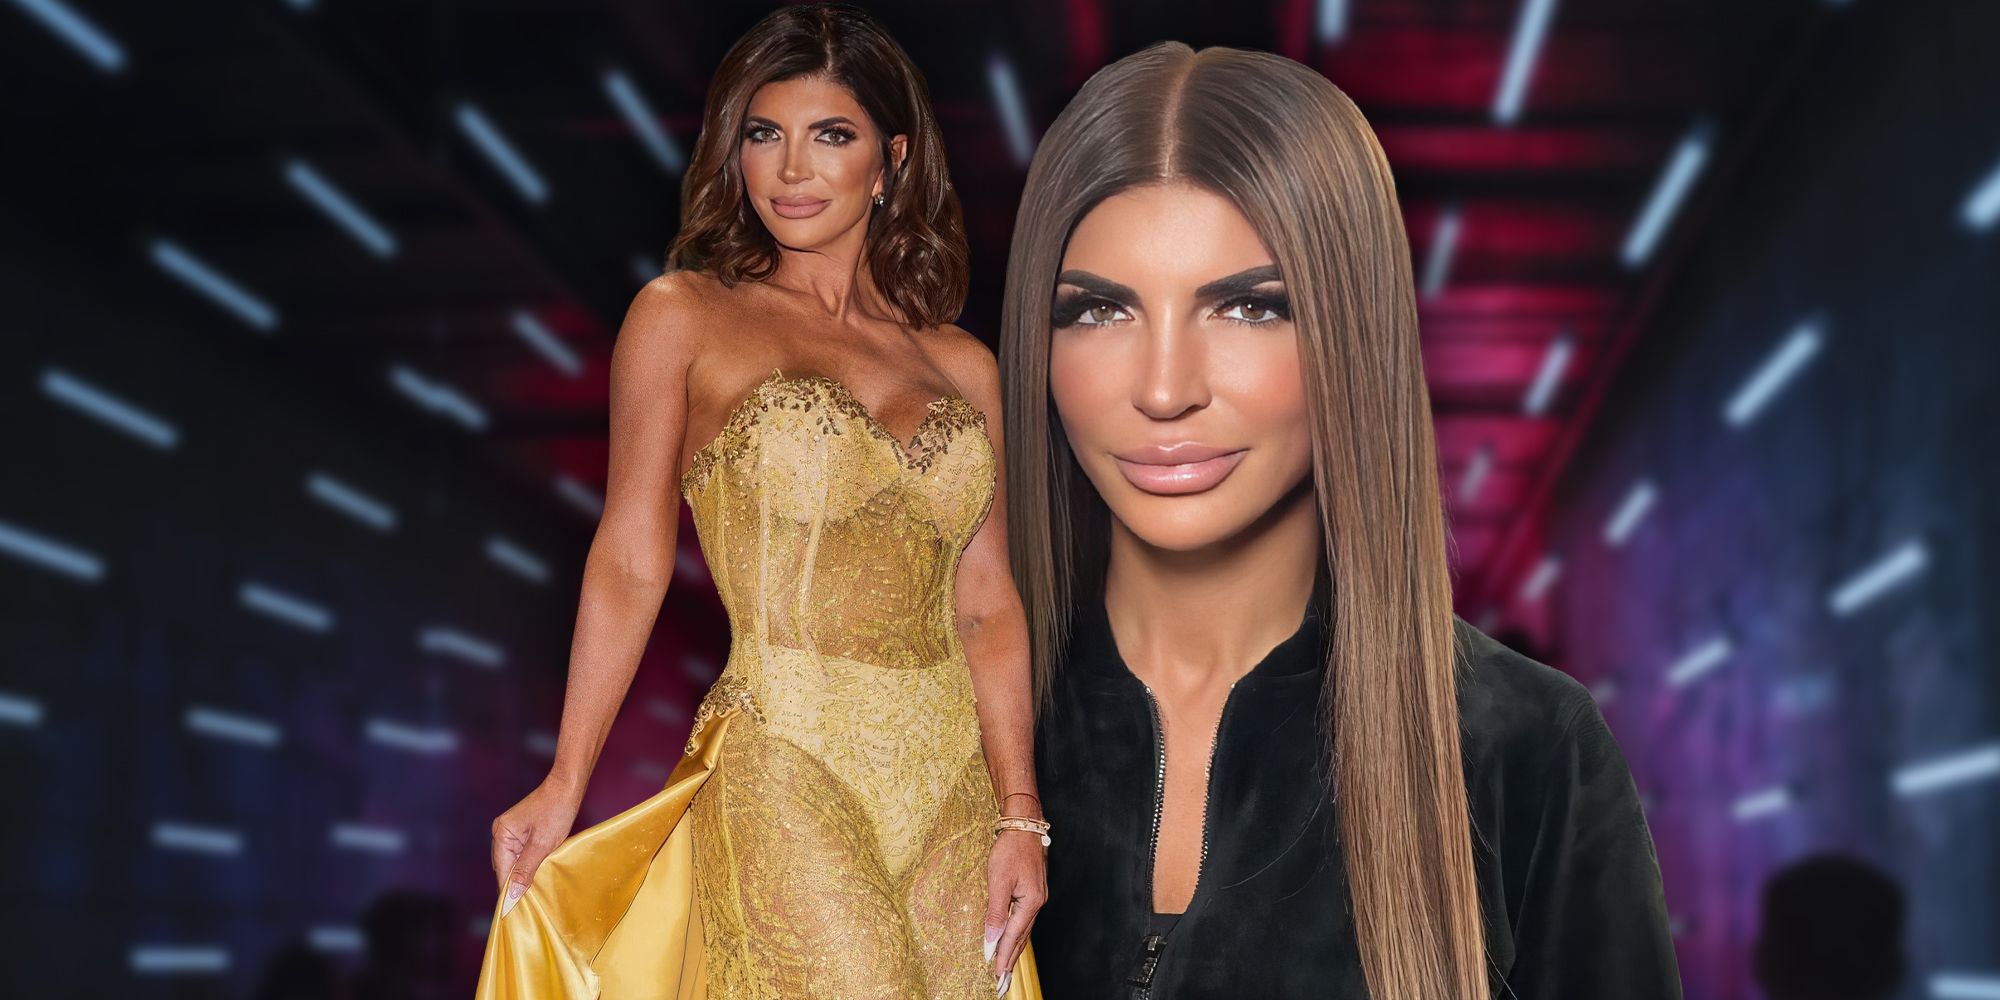 Teresa Giudice from The Real Housewives of New Jersey picture montage